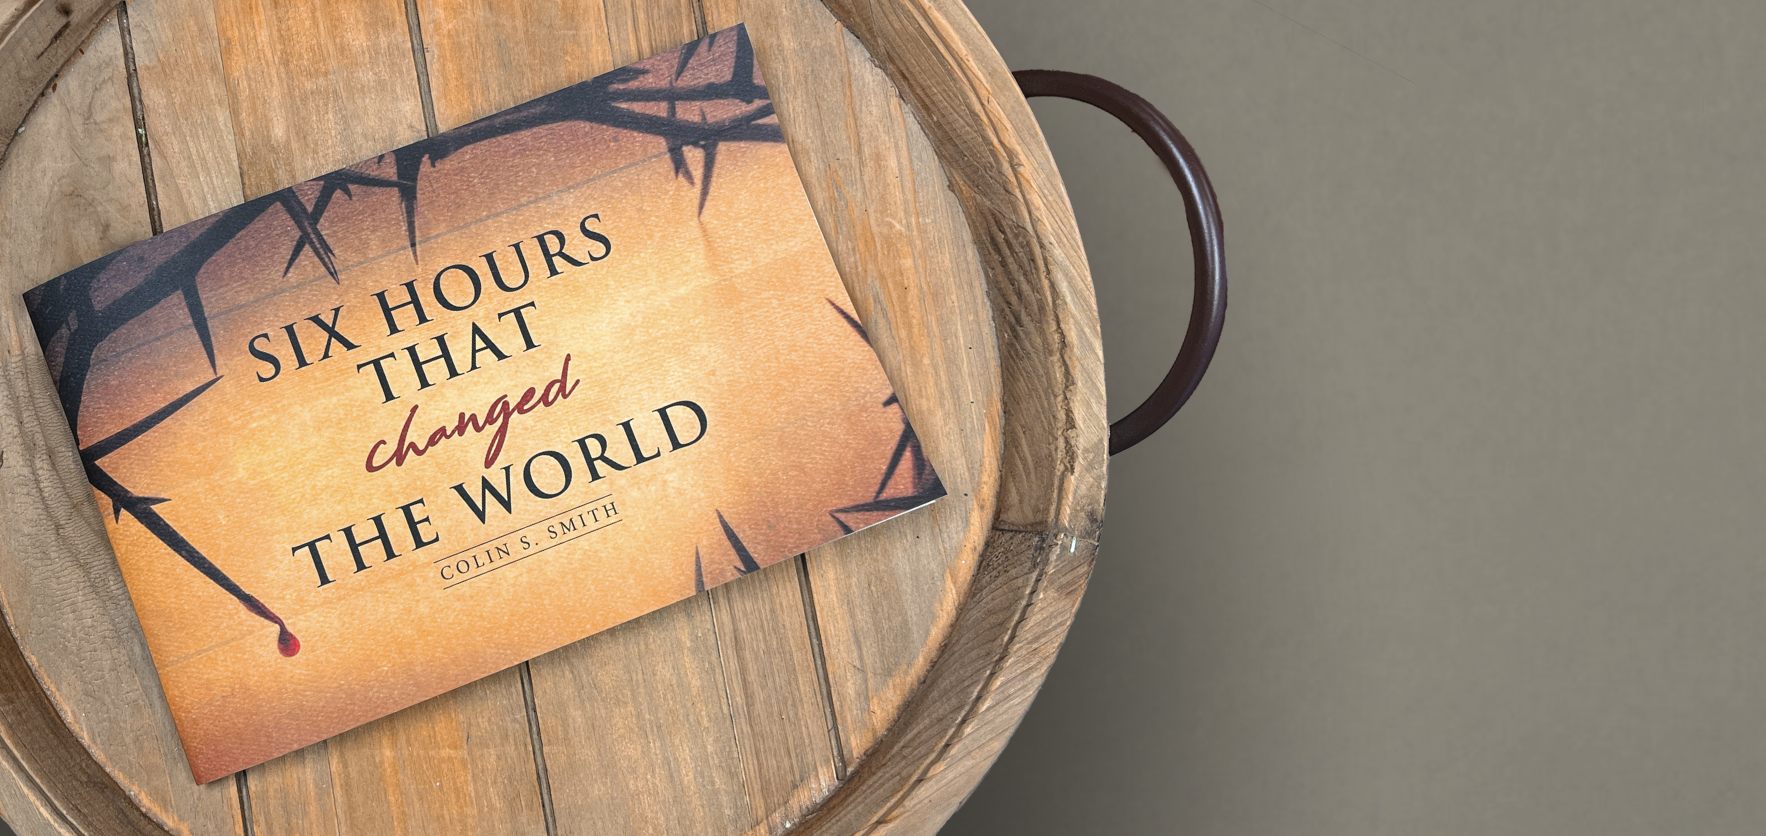 Six Hours that Changed the World Easter Book